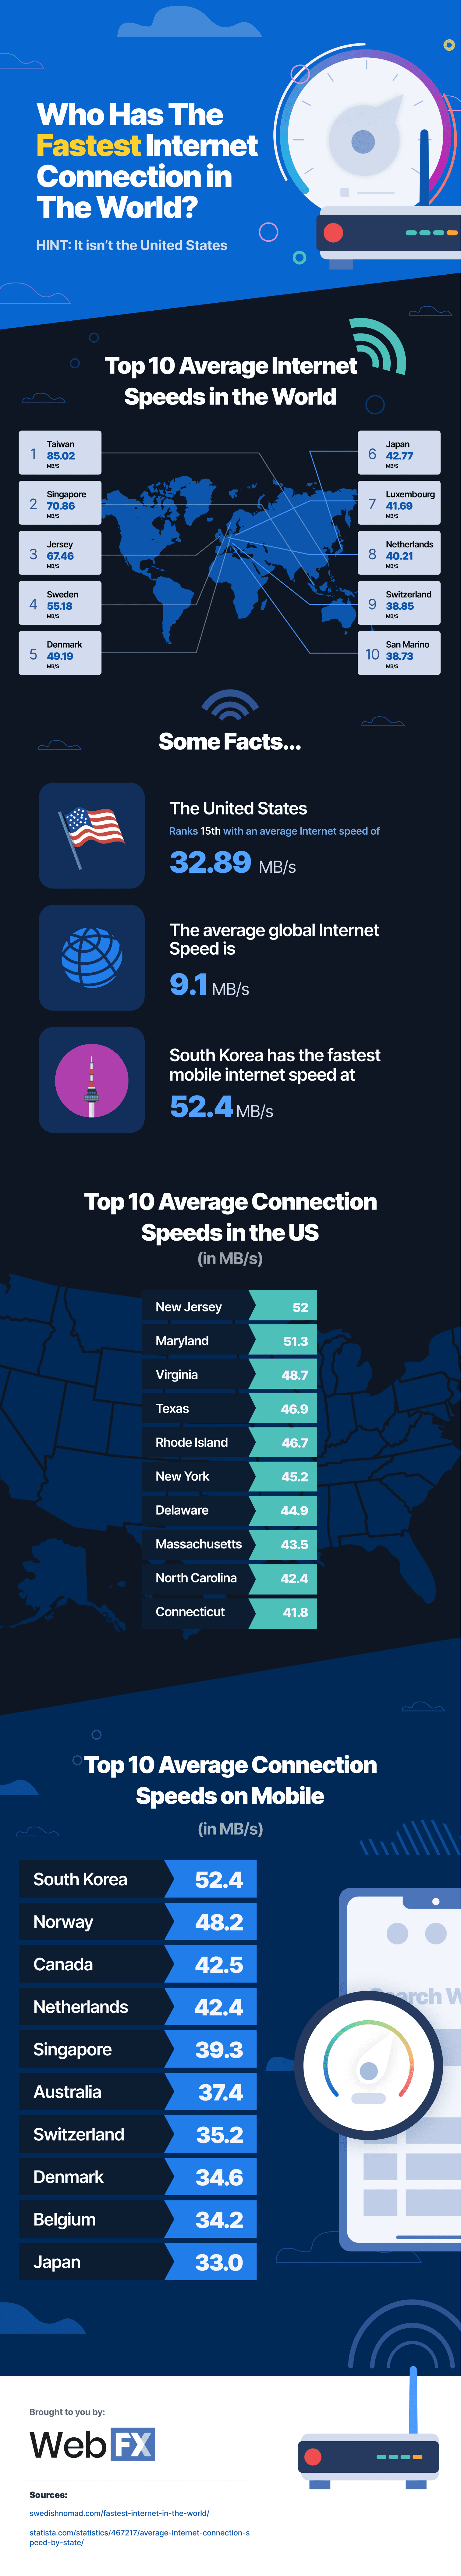 Fastest Internet Connection in the World